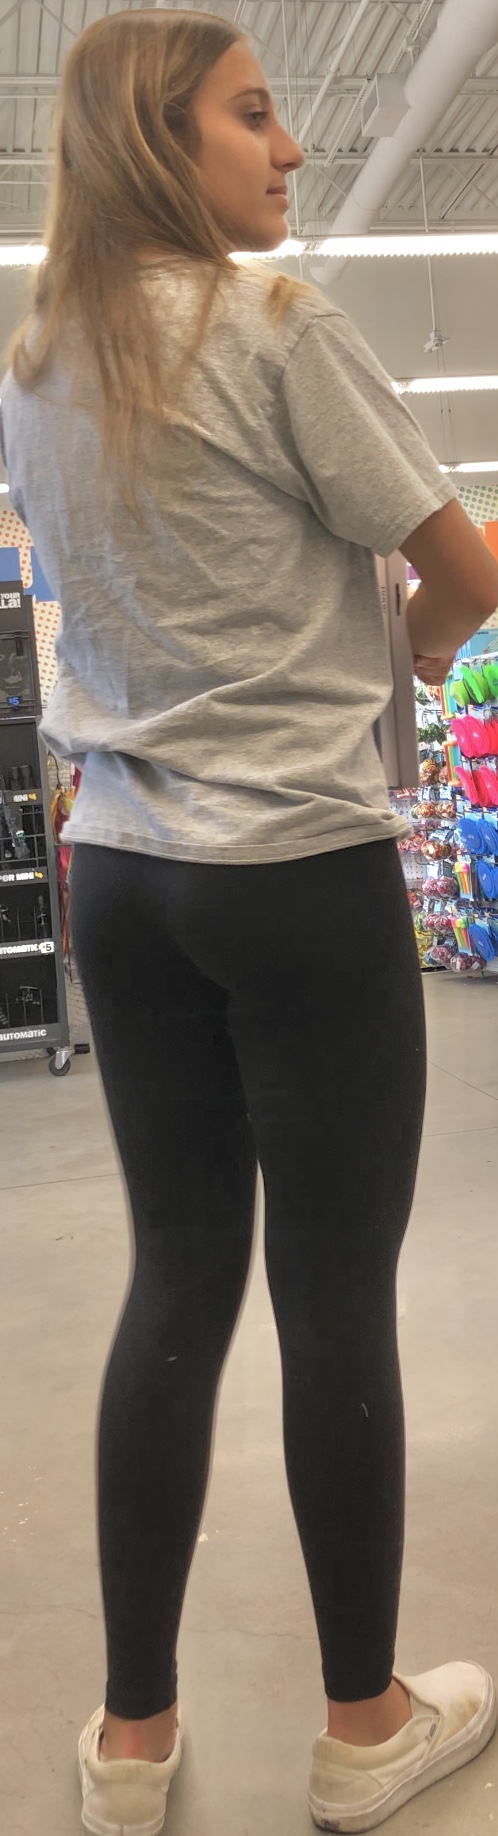 Mix of short shorts and leggings plus a serious PAWG - Short Shorts ...